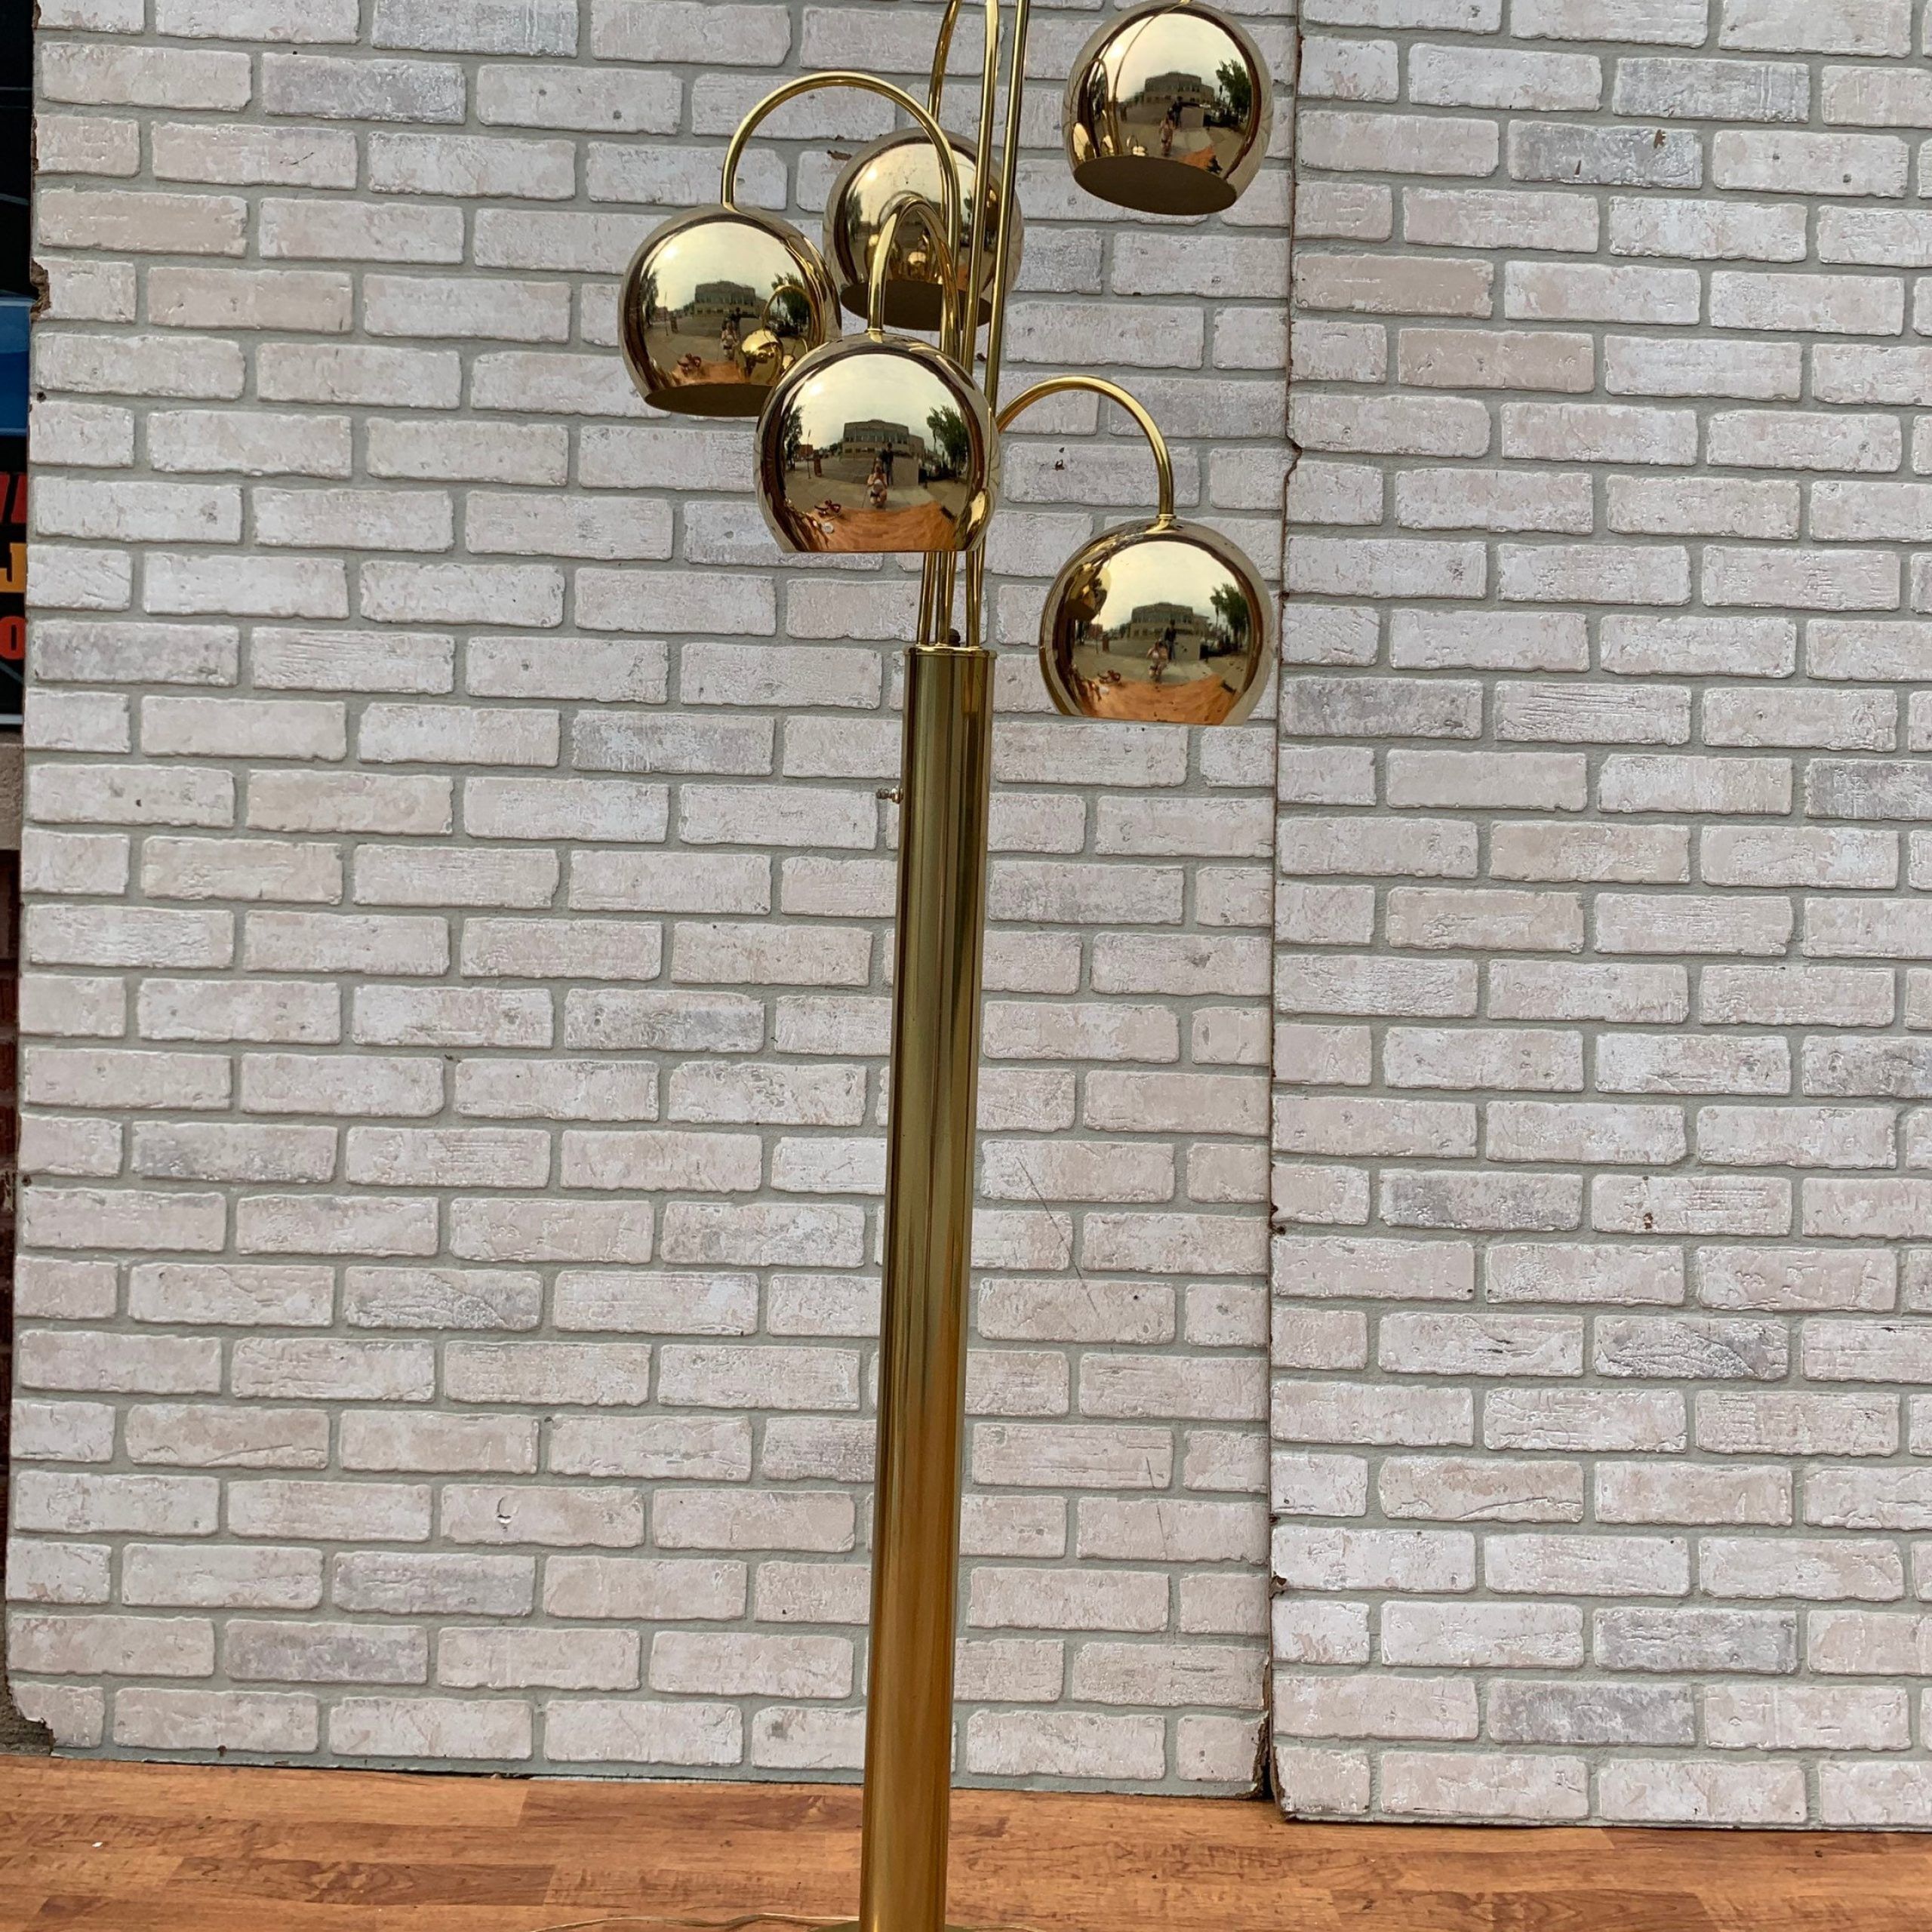 Mid Century Modern Gold 5 Light Orb Floor Lamp – Etsy With Regard To Most Current Gold Floor Lamps (View 9 of 15)